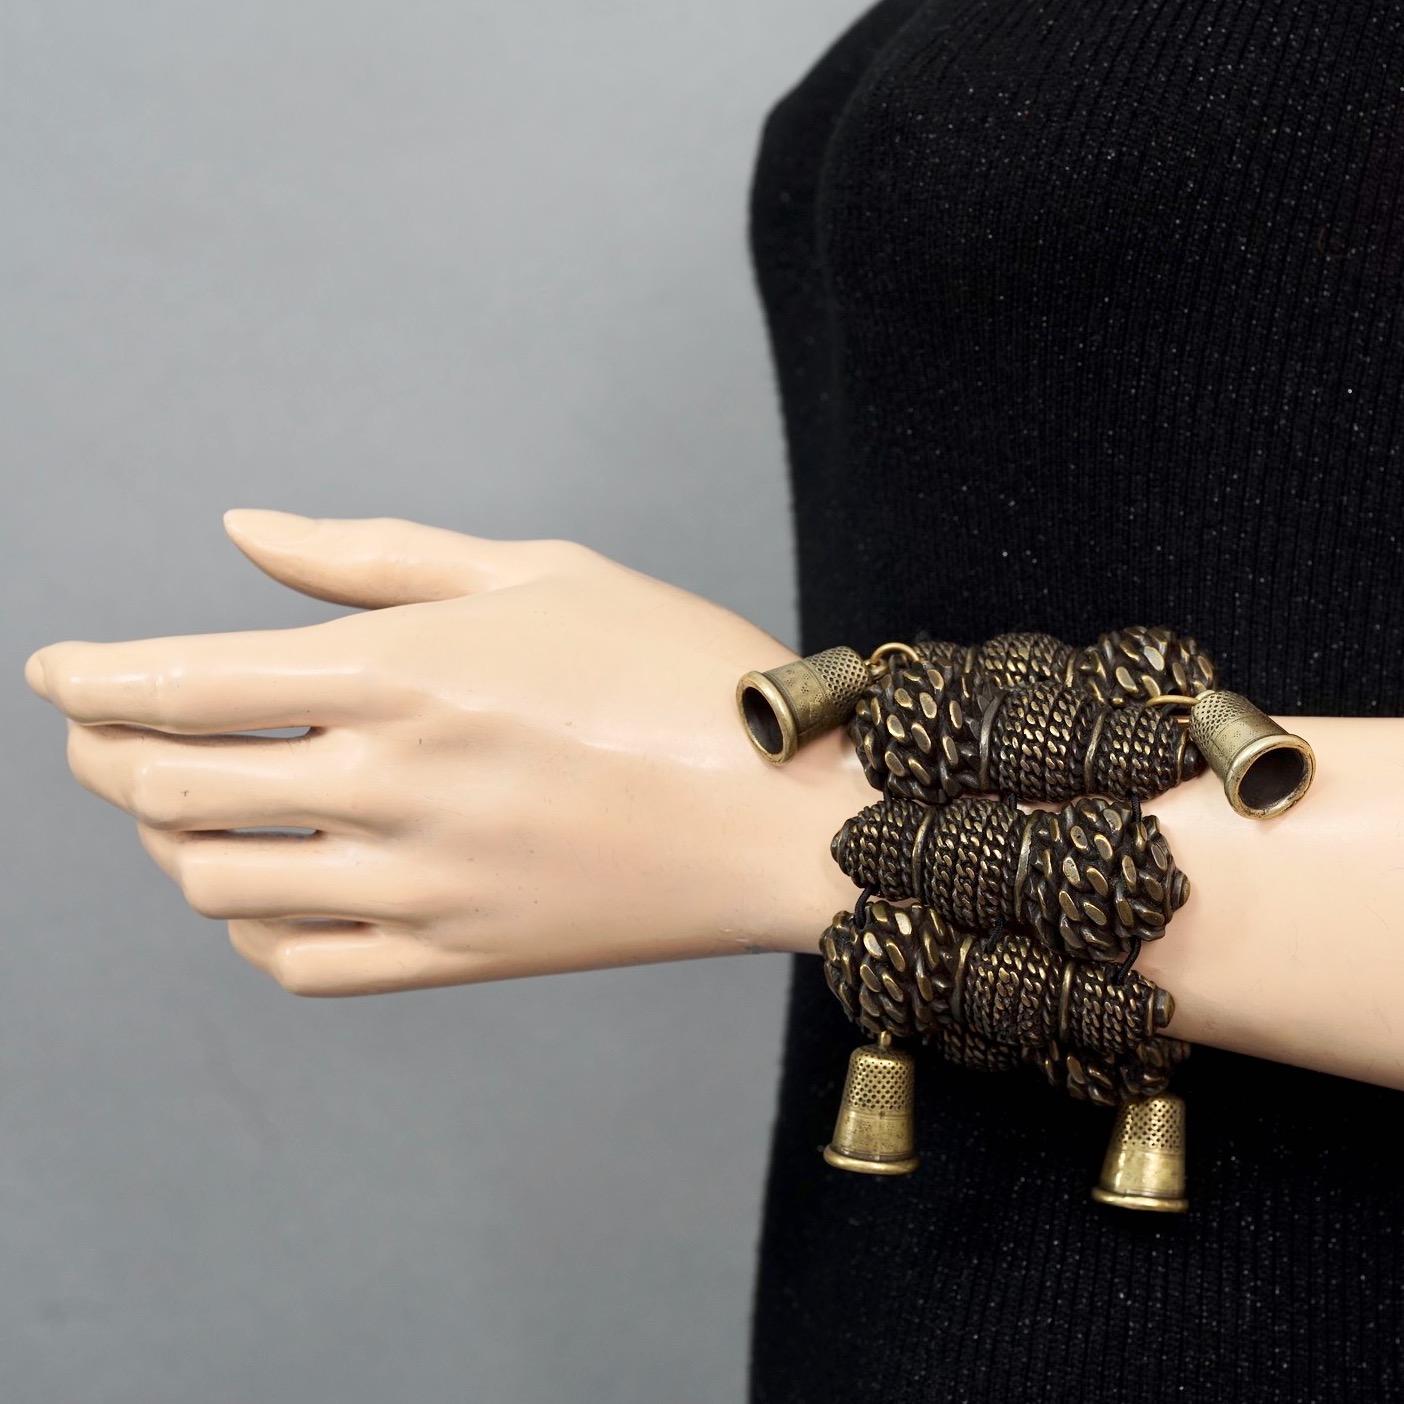 Vintage JEAN PAUL GAULTIER Thimble Brutalist Cuff Bracelet

Measurements:
Height: 2.55 inches (6.5 cm)
Wearable Length: 6.10 inches (15.5 cm) without stretching the elastic

Features:
- 100% Authentic JEAN PAUL GAULTIER.
- Brutalist gilt rope twist